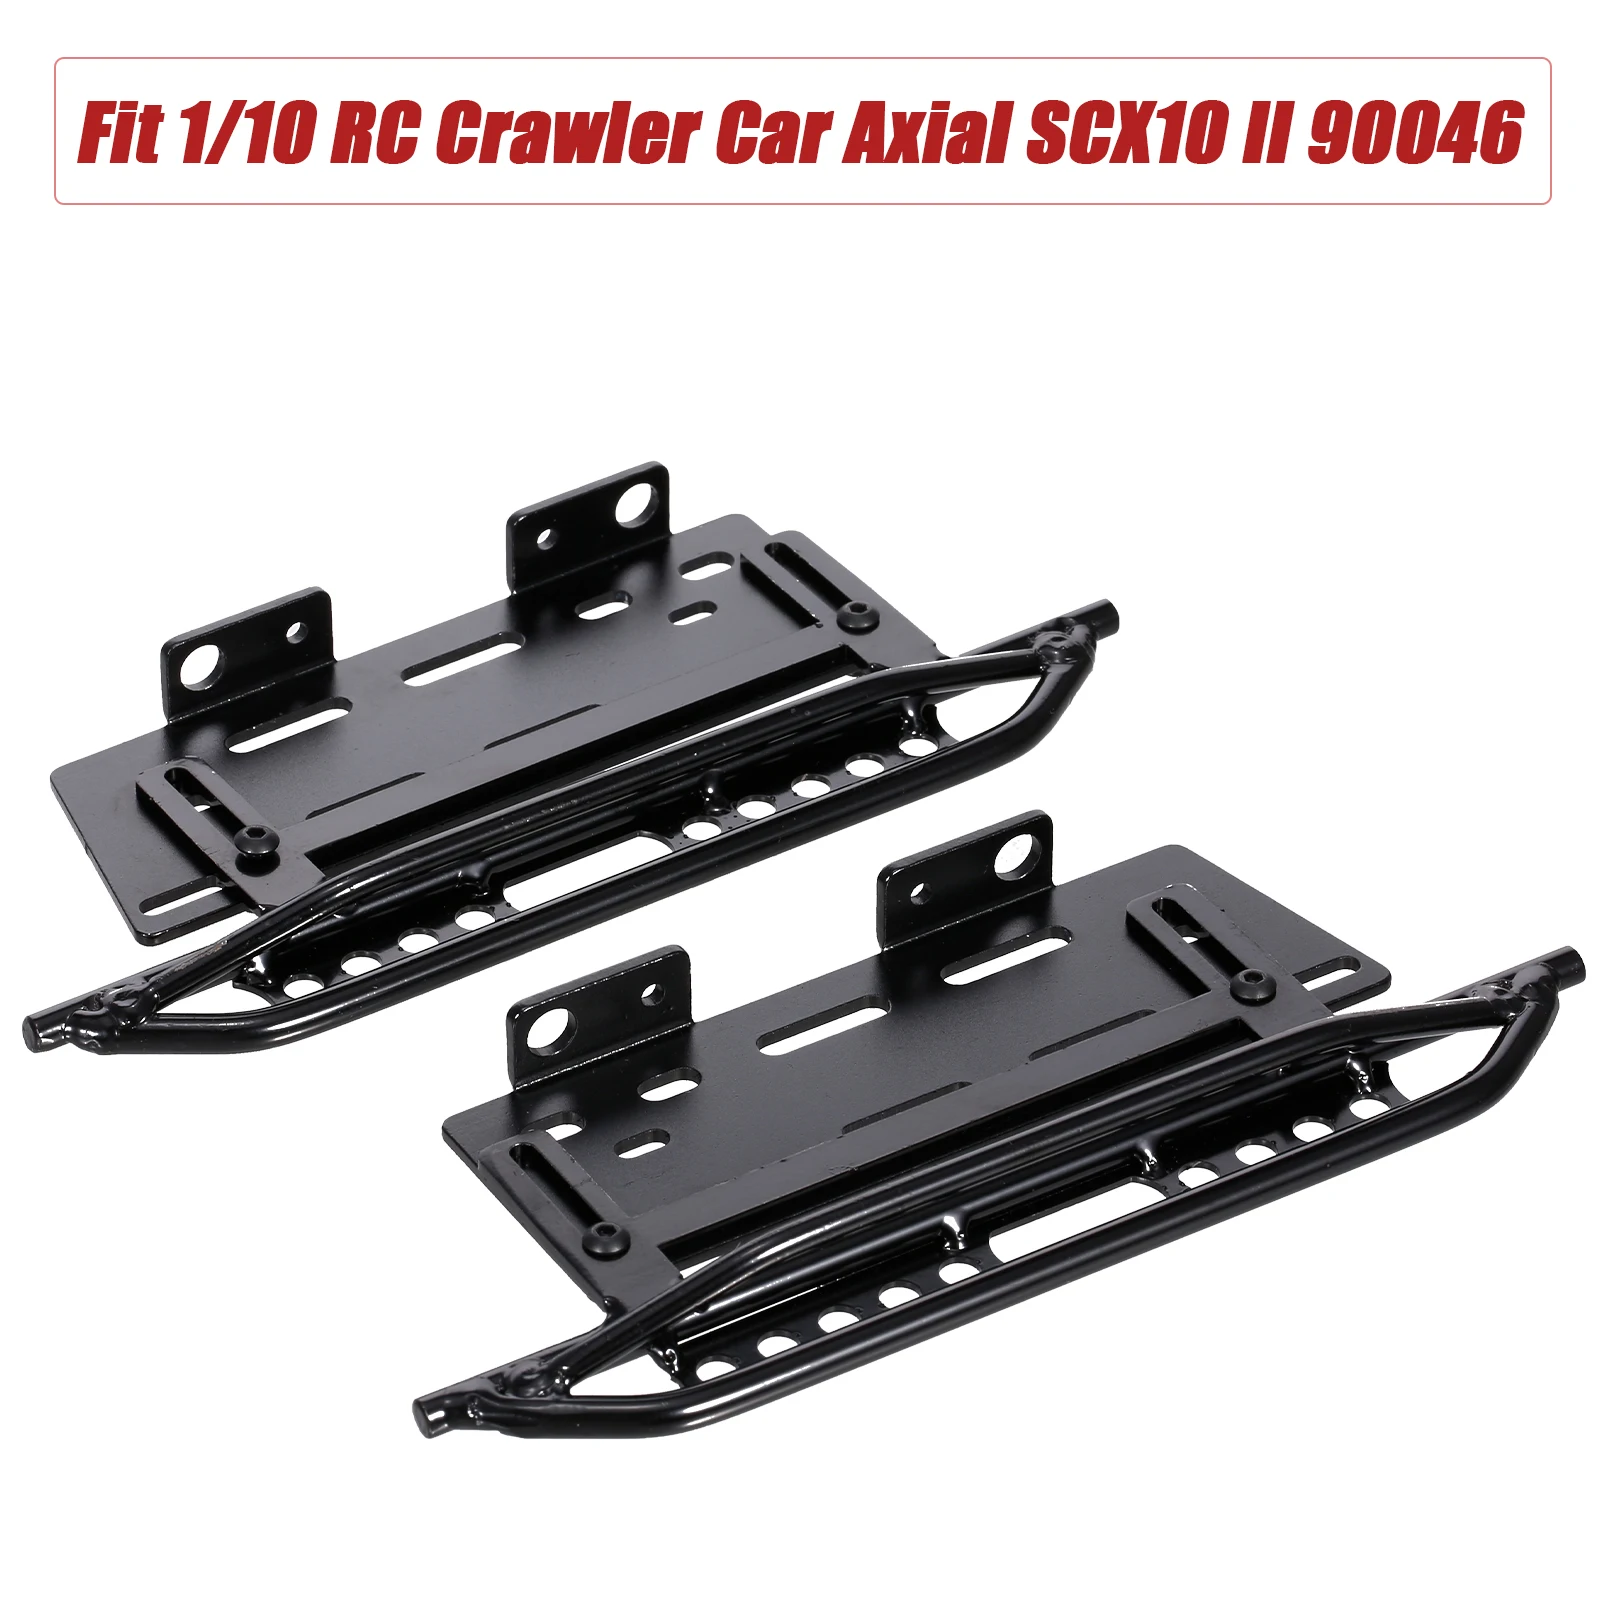 

Metal Side Pedal Racing Running Boards Foot-Plate Compatible with 1/10 RC Crawler Car Axial SCX10 II 90046